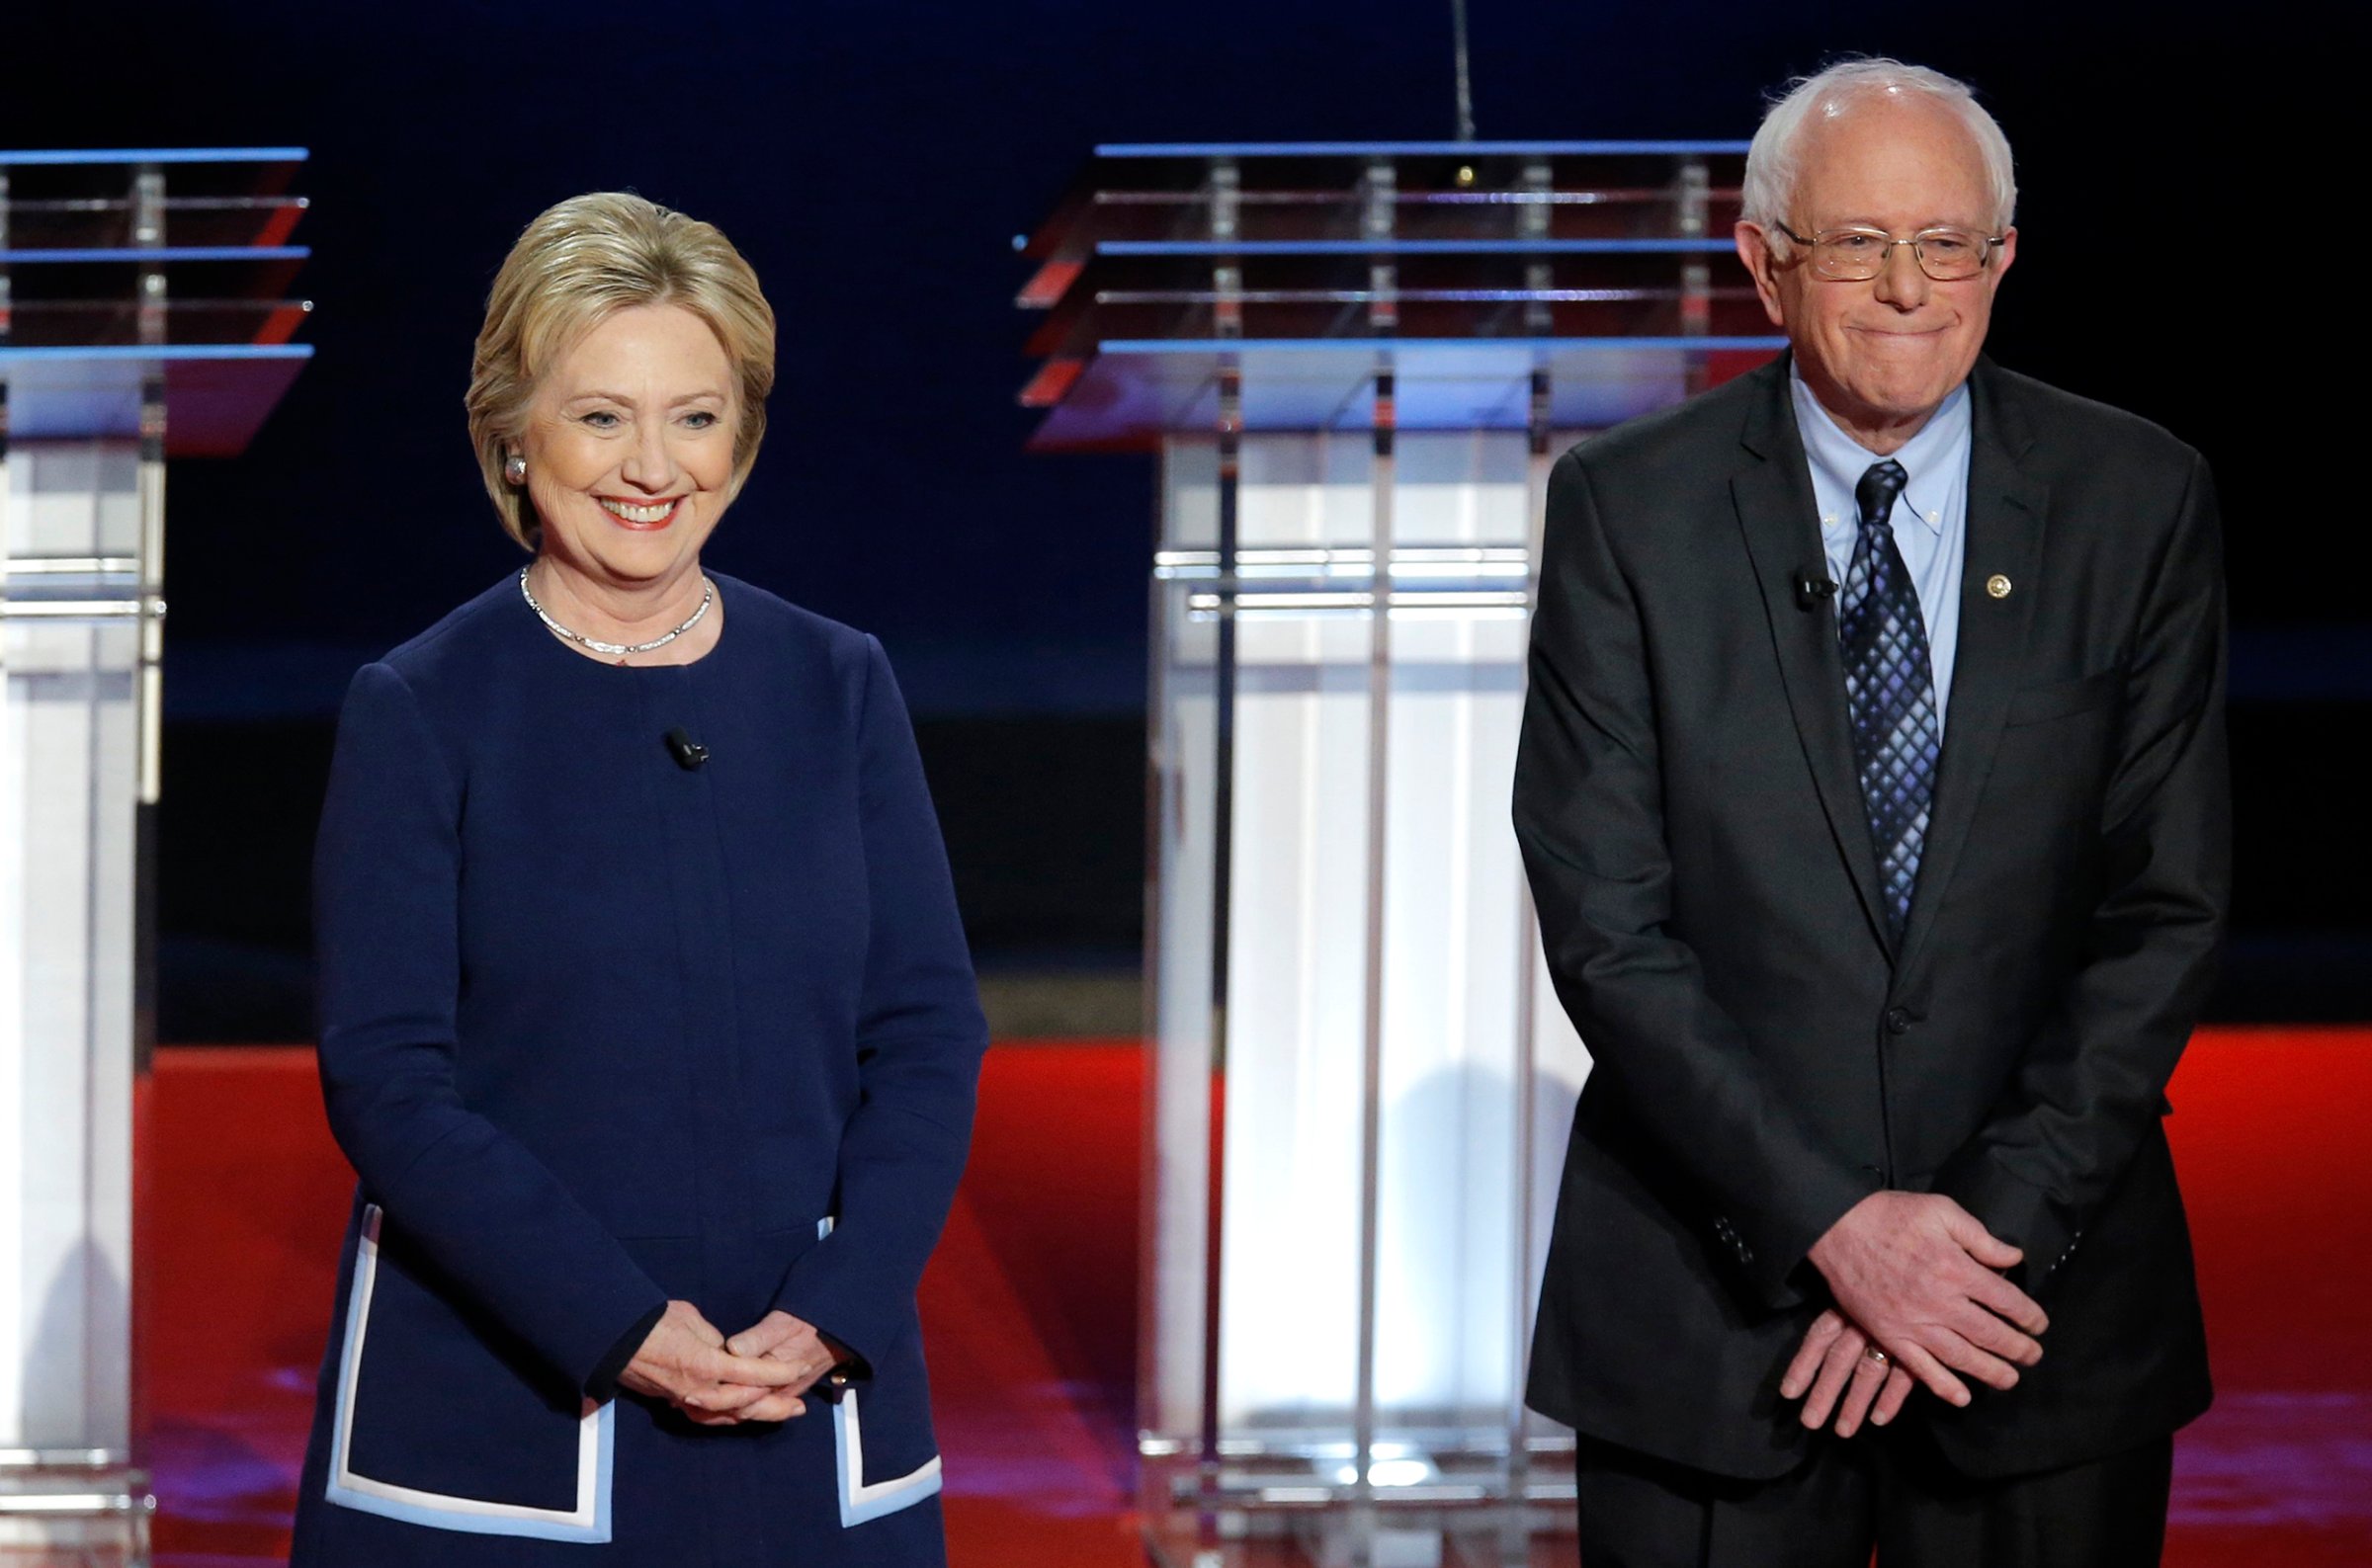 Hillary Clinton and Bernie Sanders pose together onstage at the start of the U.S. Democratic presidential candidates' debate in Flint, Michi. on March 6, 2016.